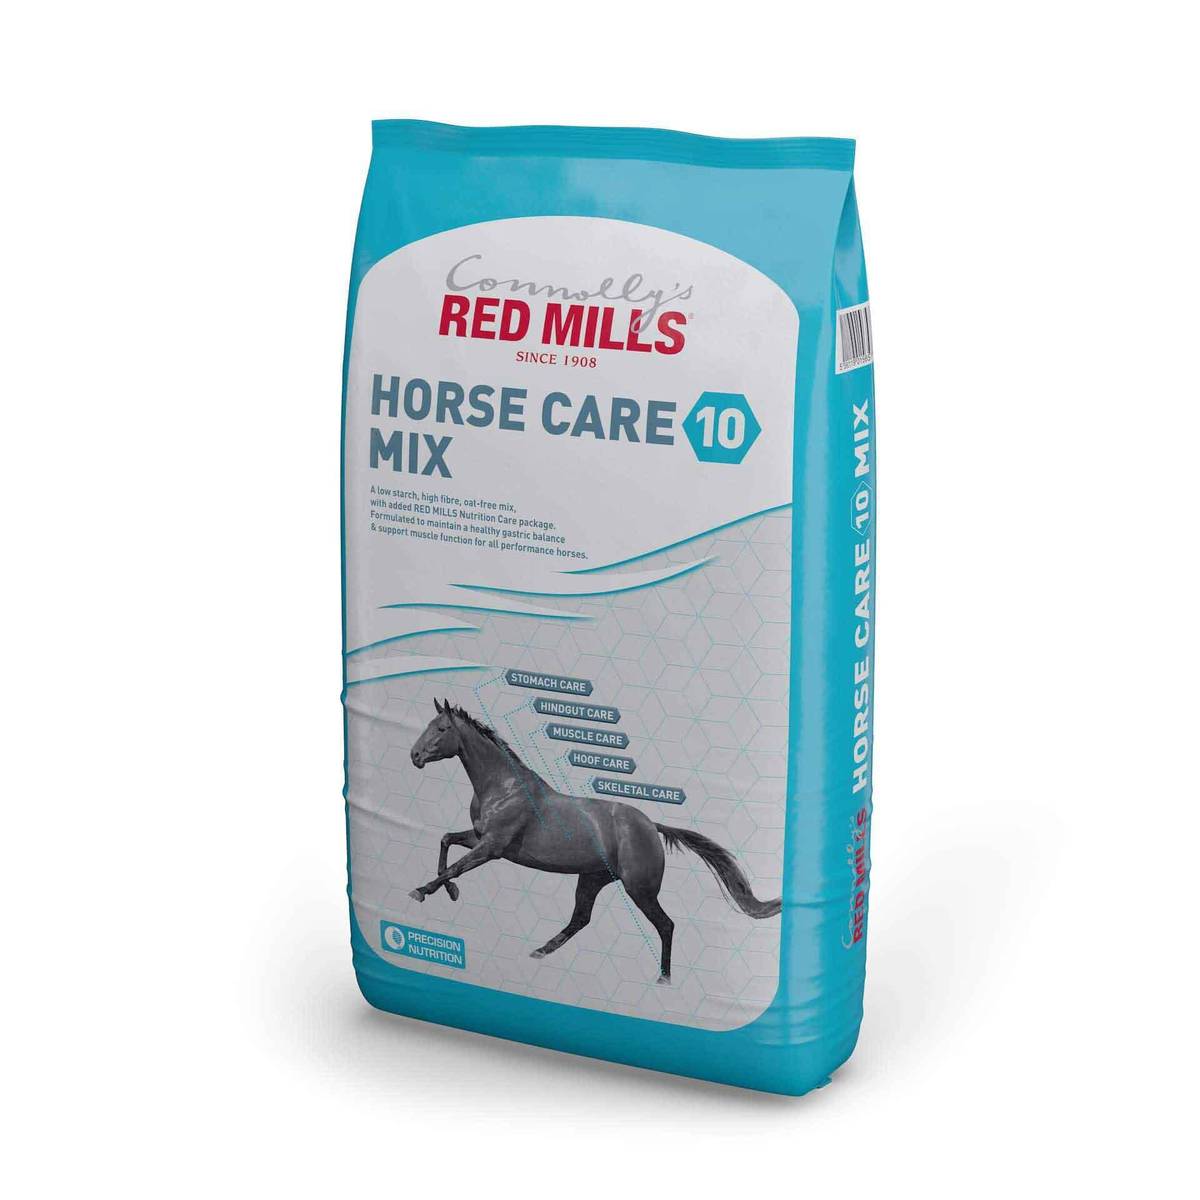 RM Horse Care 10 Mix